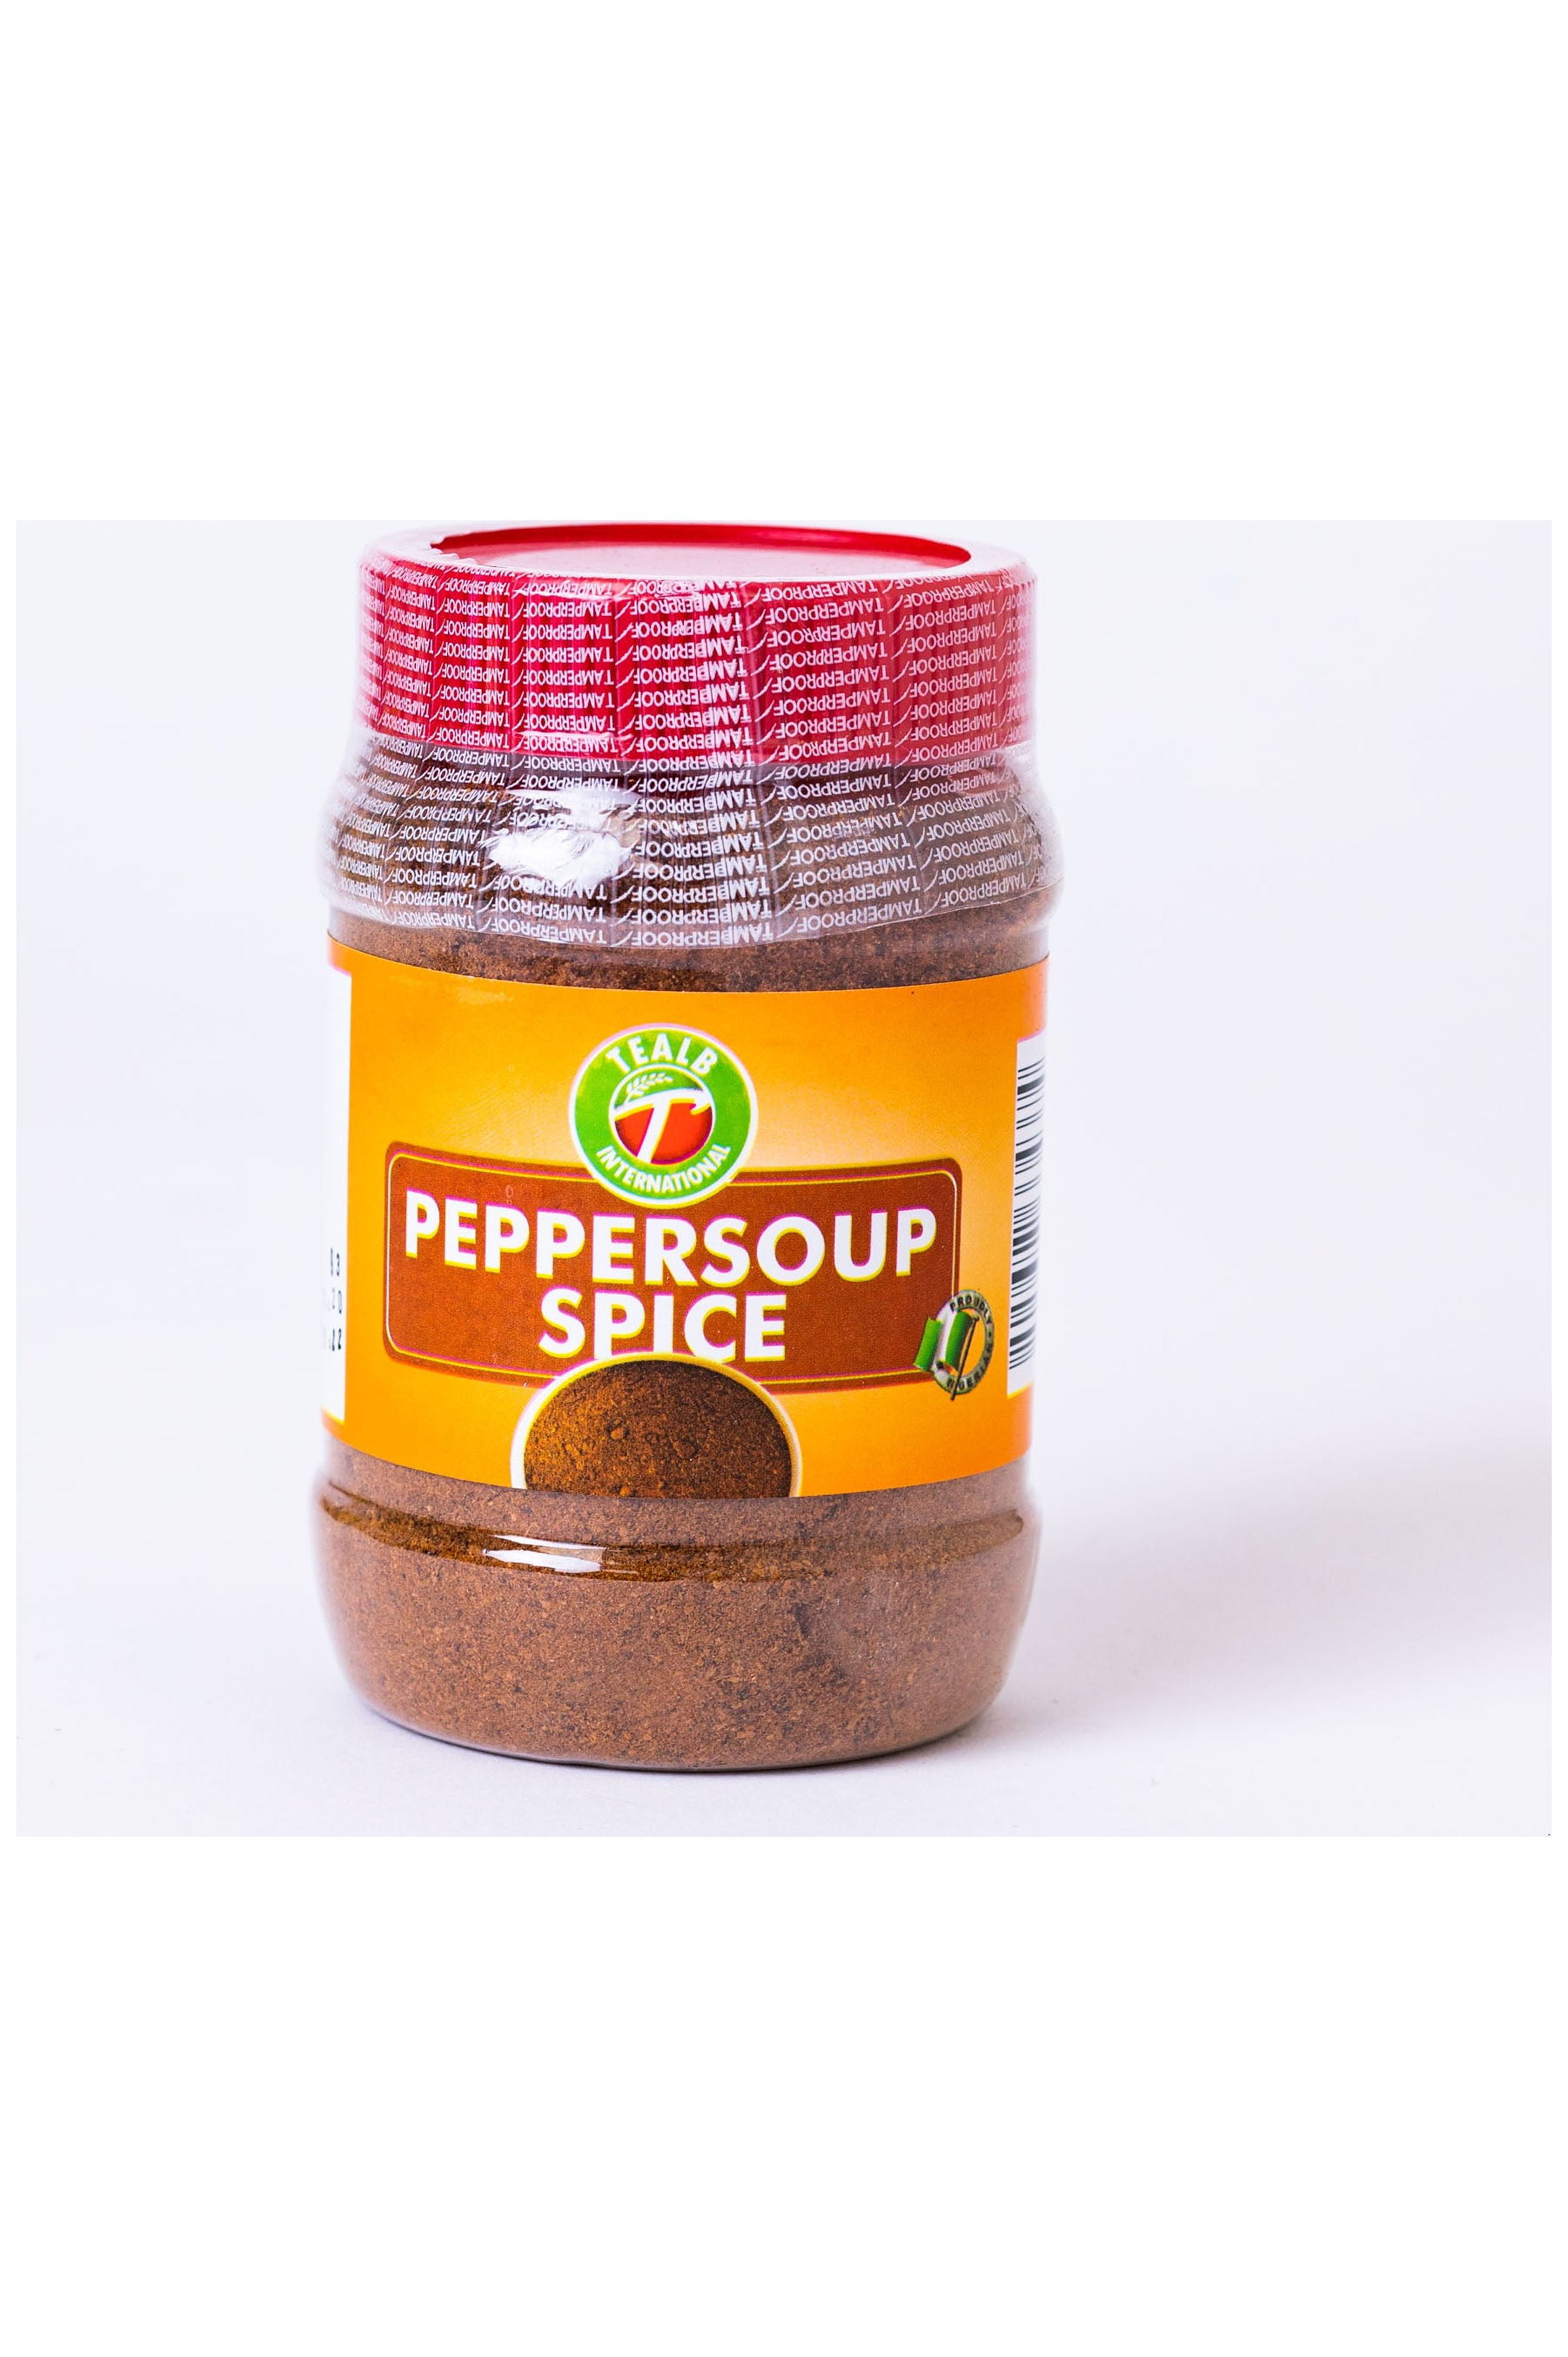 USimplySeason Pepper Soup Spice (4.8 oz) - African-Inspired Seasoning Blend  - Vegan, Non-GMO, All-Natural - Ideal for Soups, Stews, Made in USA